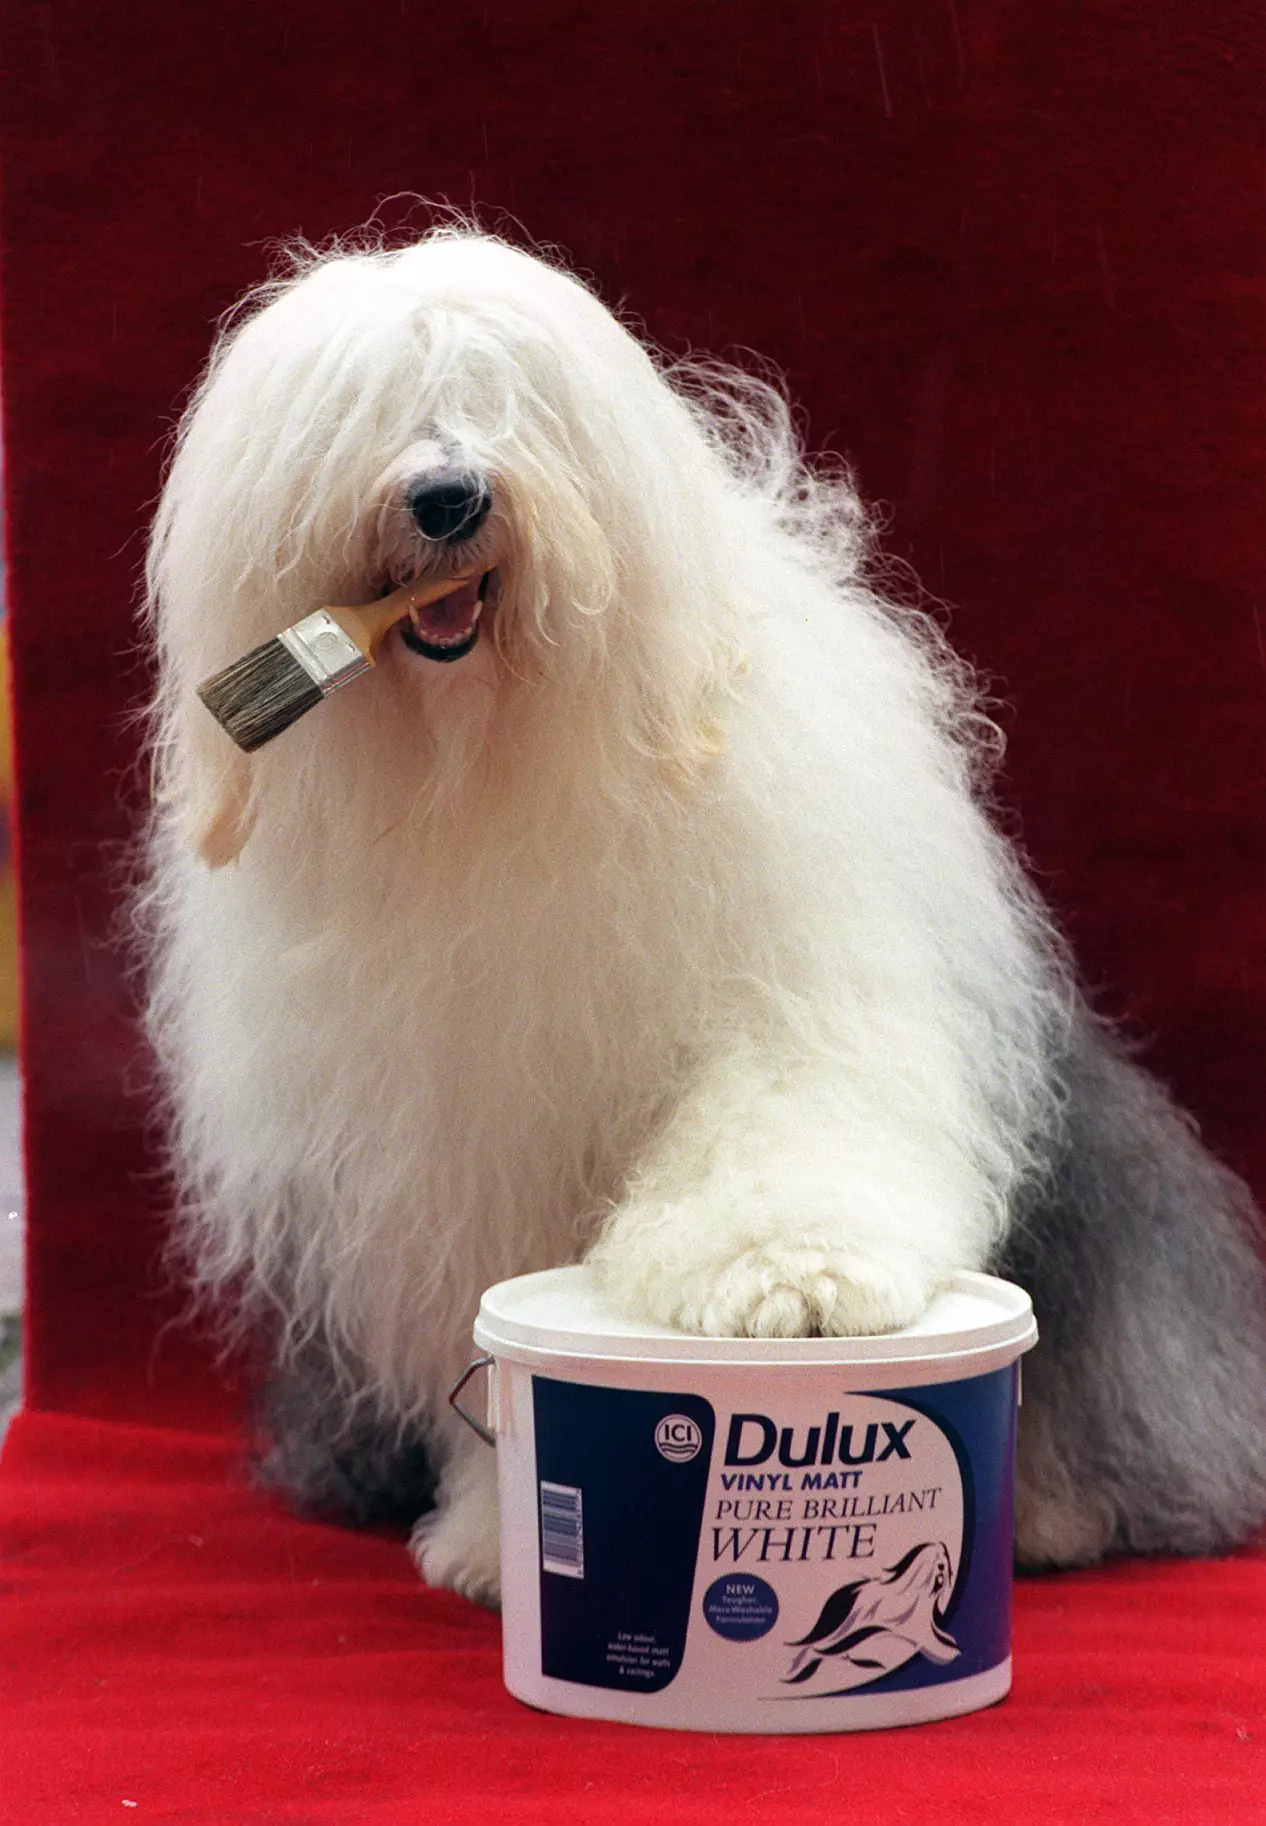 The Dulux dog in 1996 (